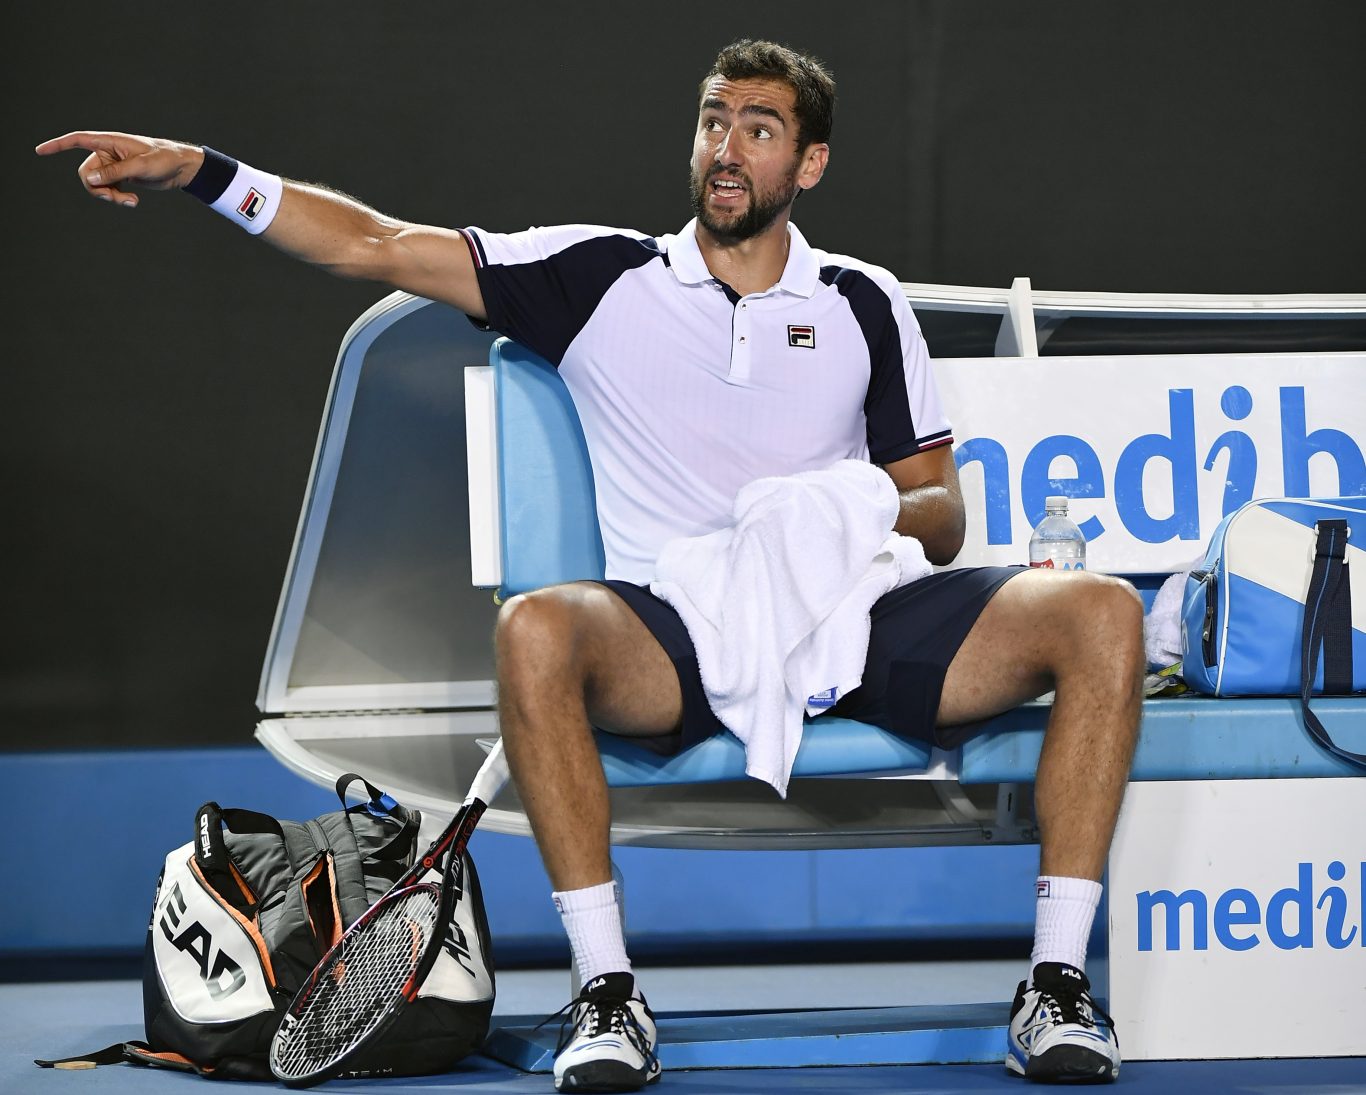 Hd Marin Cilic Giving Instruction Free Desktop Mobile Images